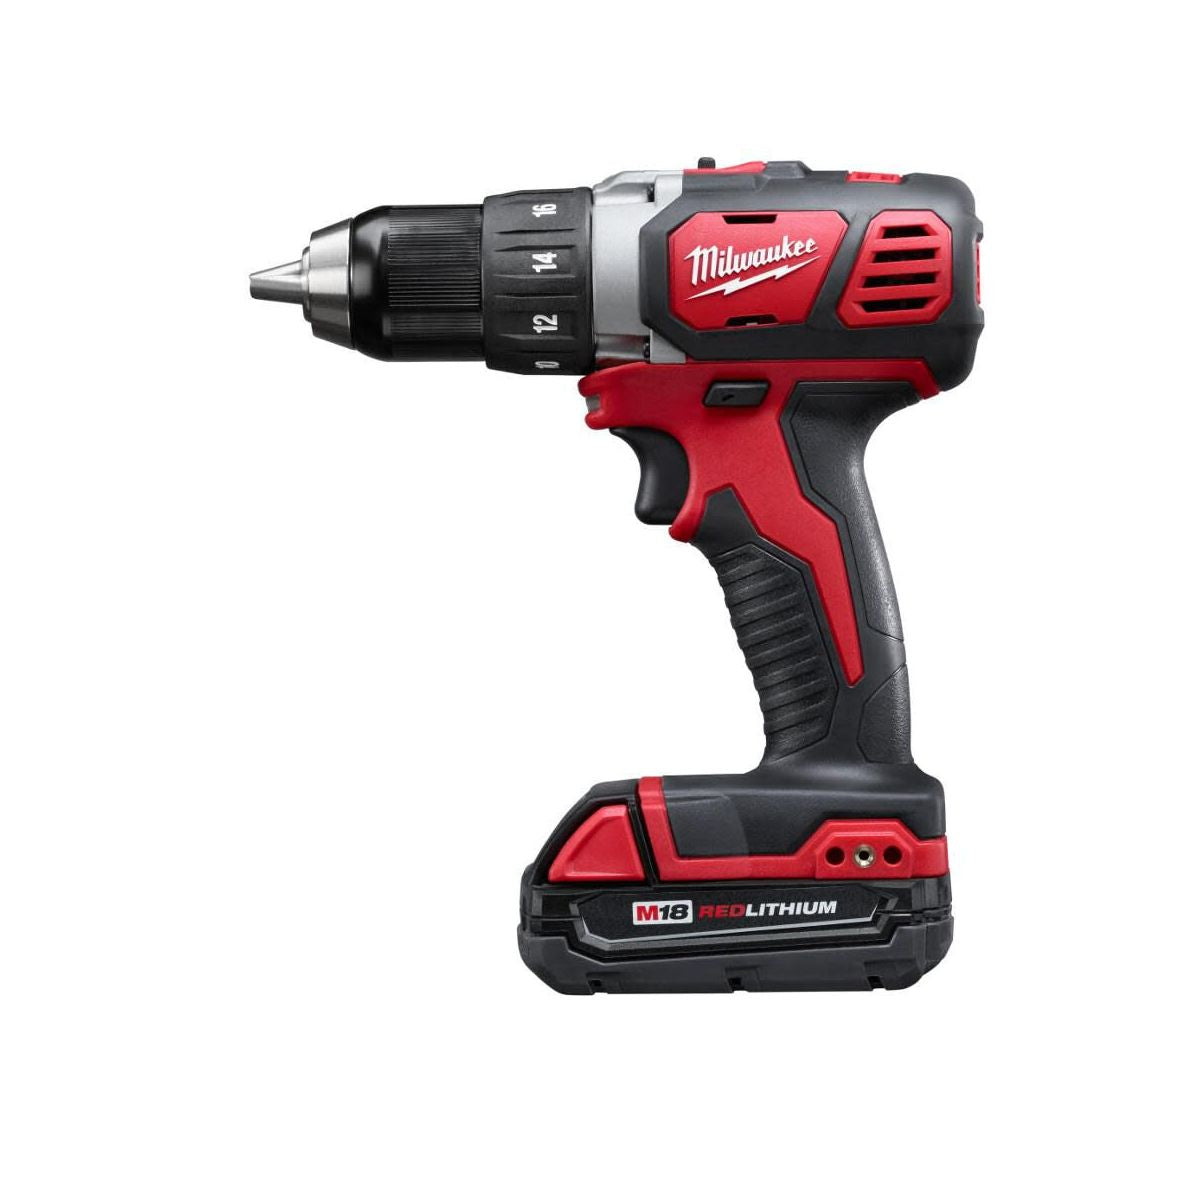 2606-22CT - M18 Compact 1/2" Drill Driver Kit w/Compact Batteries